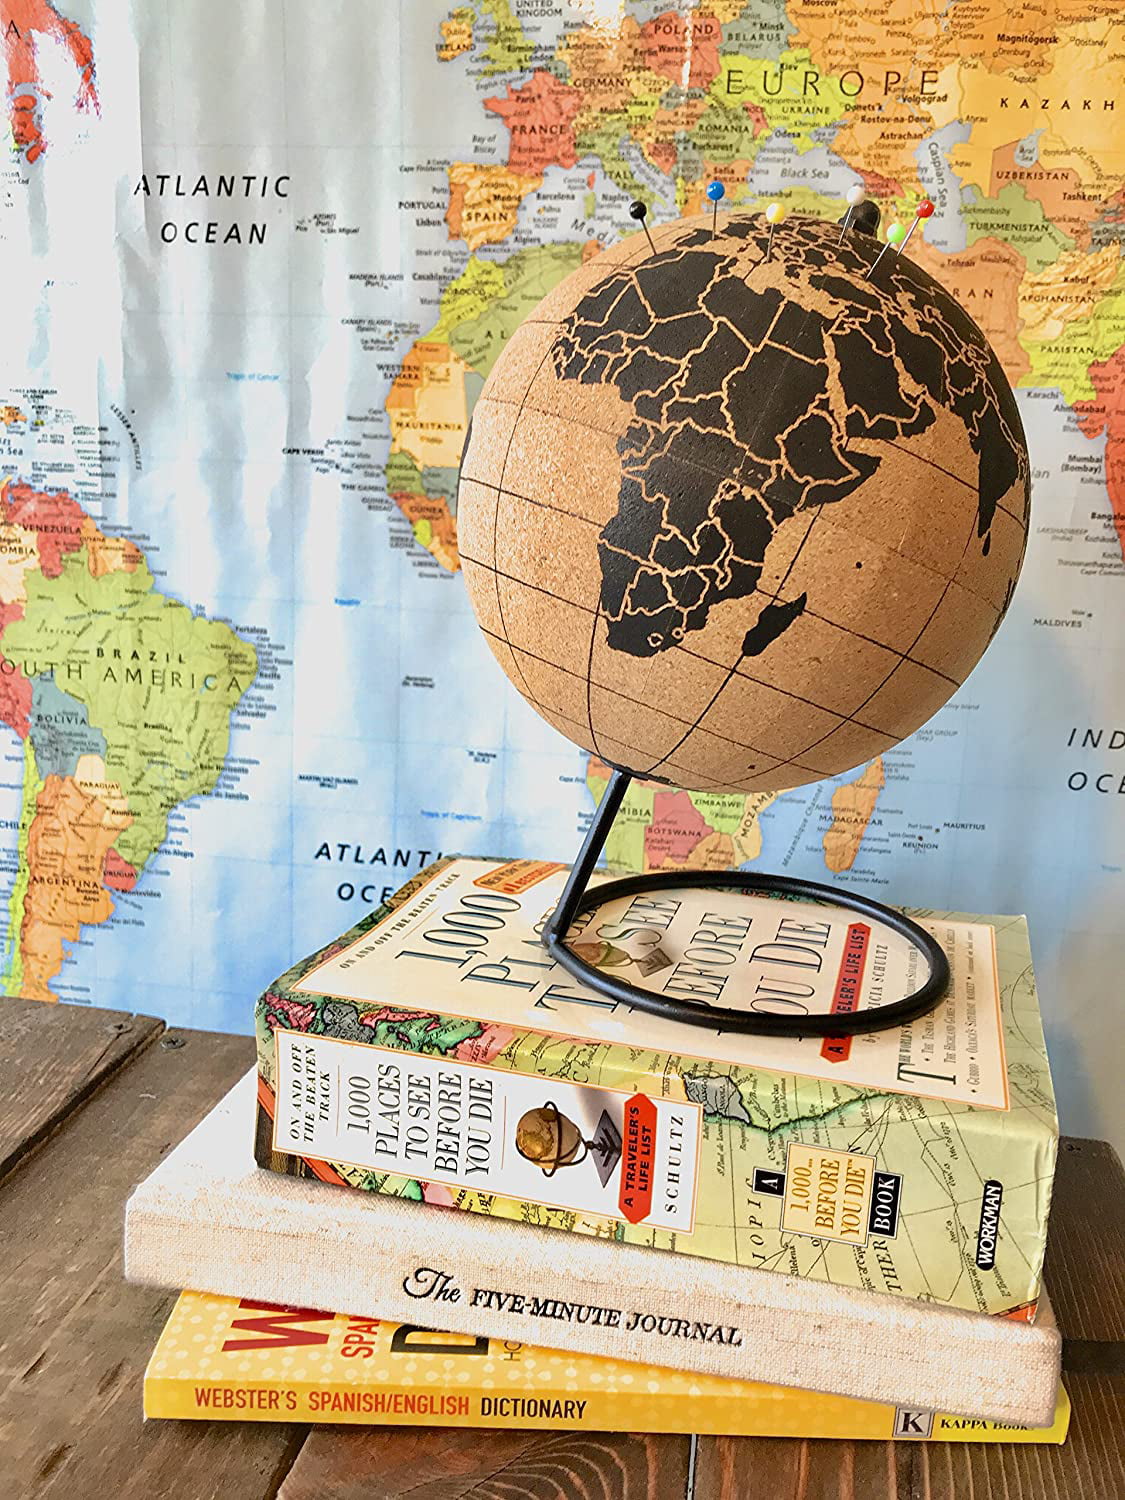 Vacation Map Stainless Steel Base Cork Globe Travel Tracker with Gold Push Pins ITAs Black/Gold Pins Great for Mapping Travels Personalized World Map Tracker Push Pin World Map | 